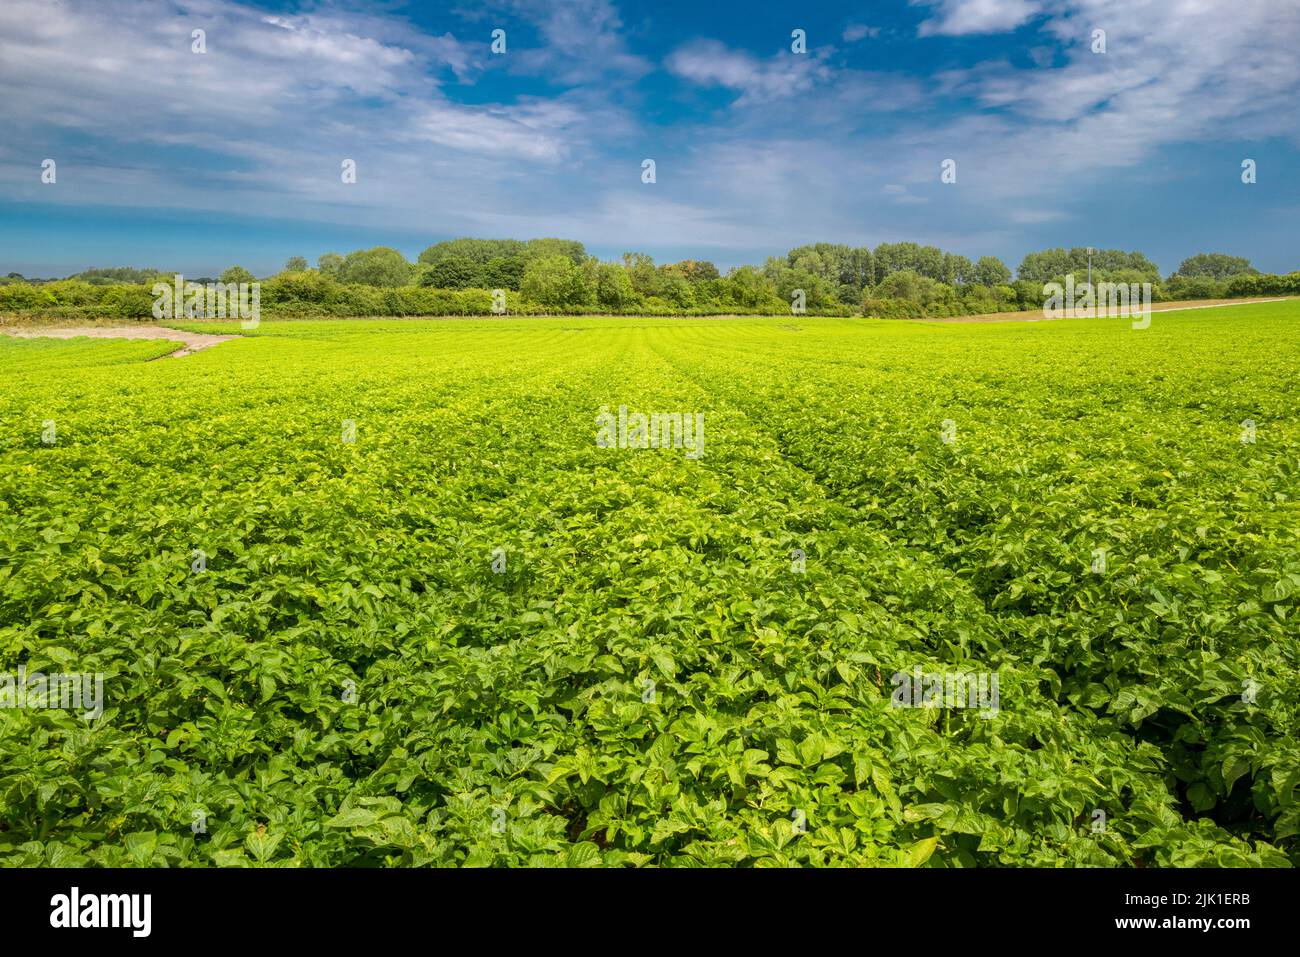 A large field of potatoes. Stock Photo